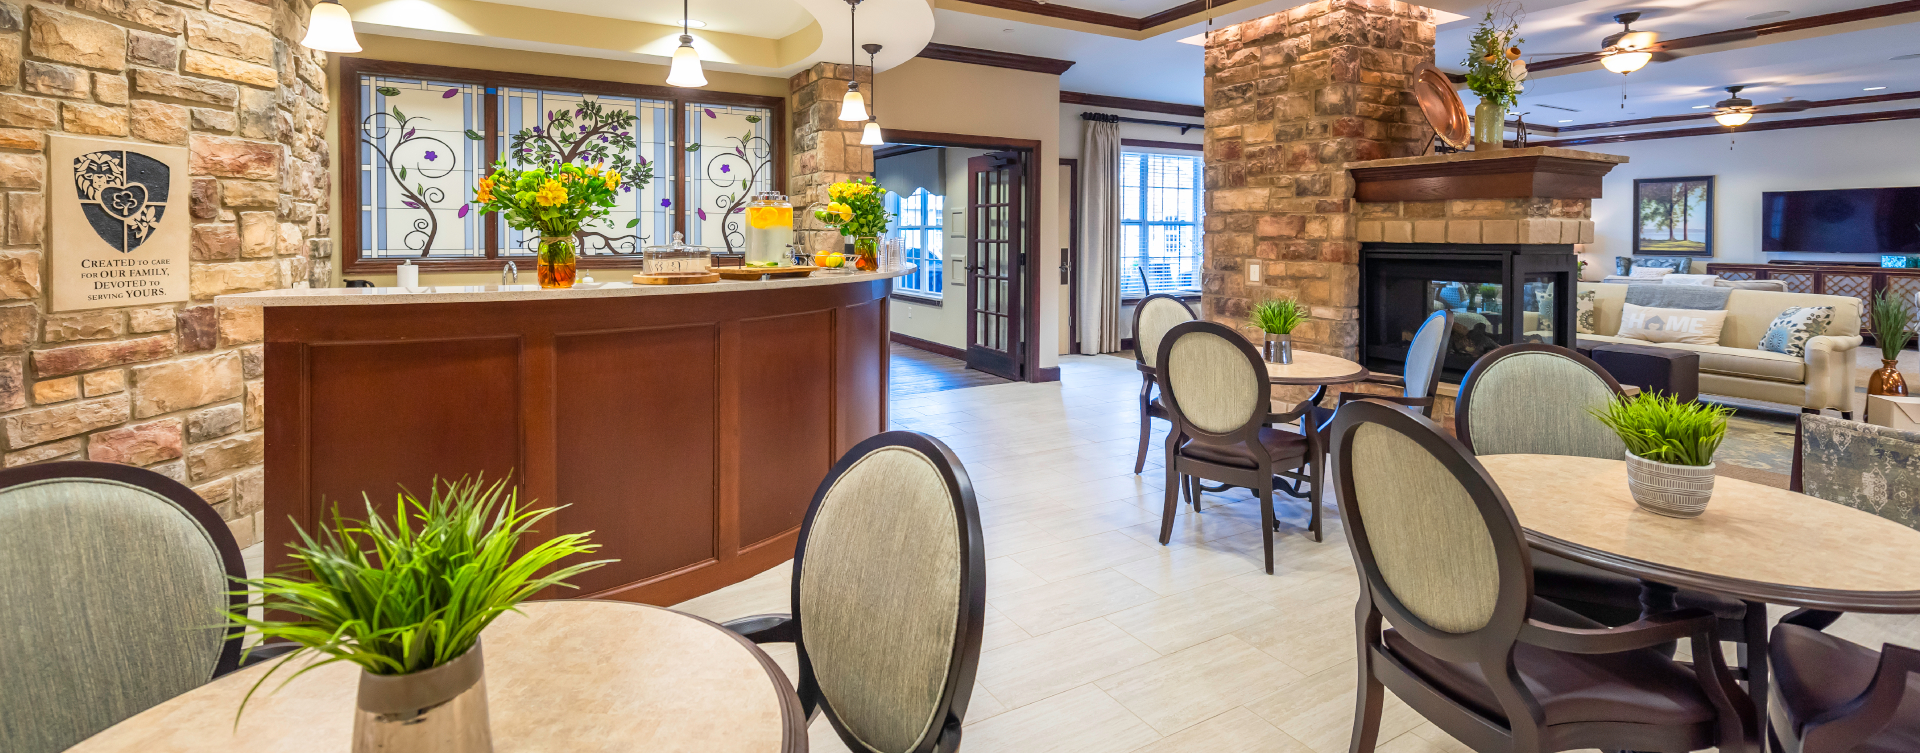 Intimate enough to entertain your closest family; you can even host your next get together in the bistro at Bickford of Shelby Township